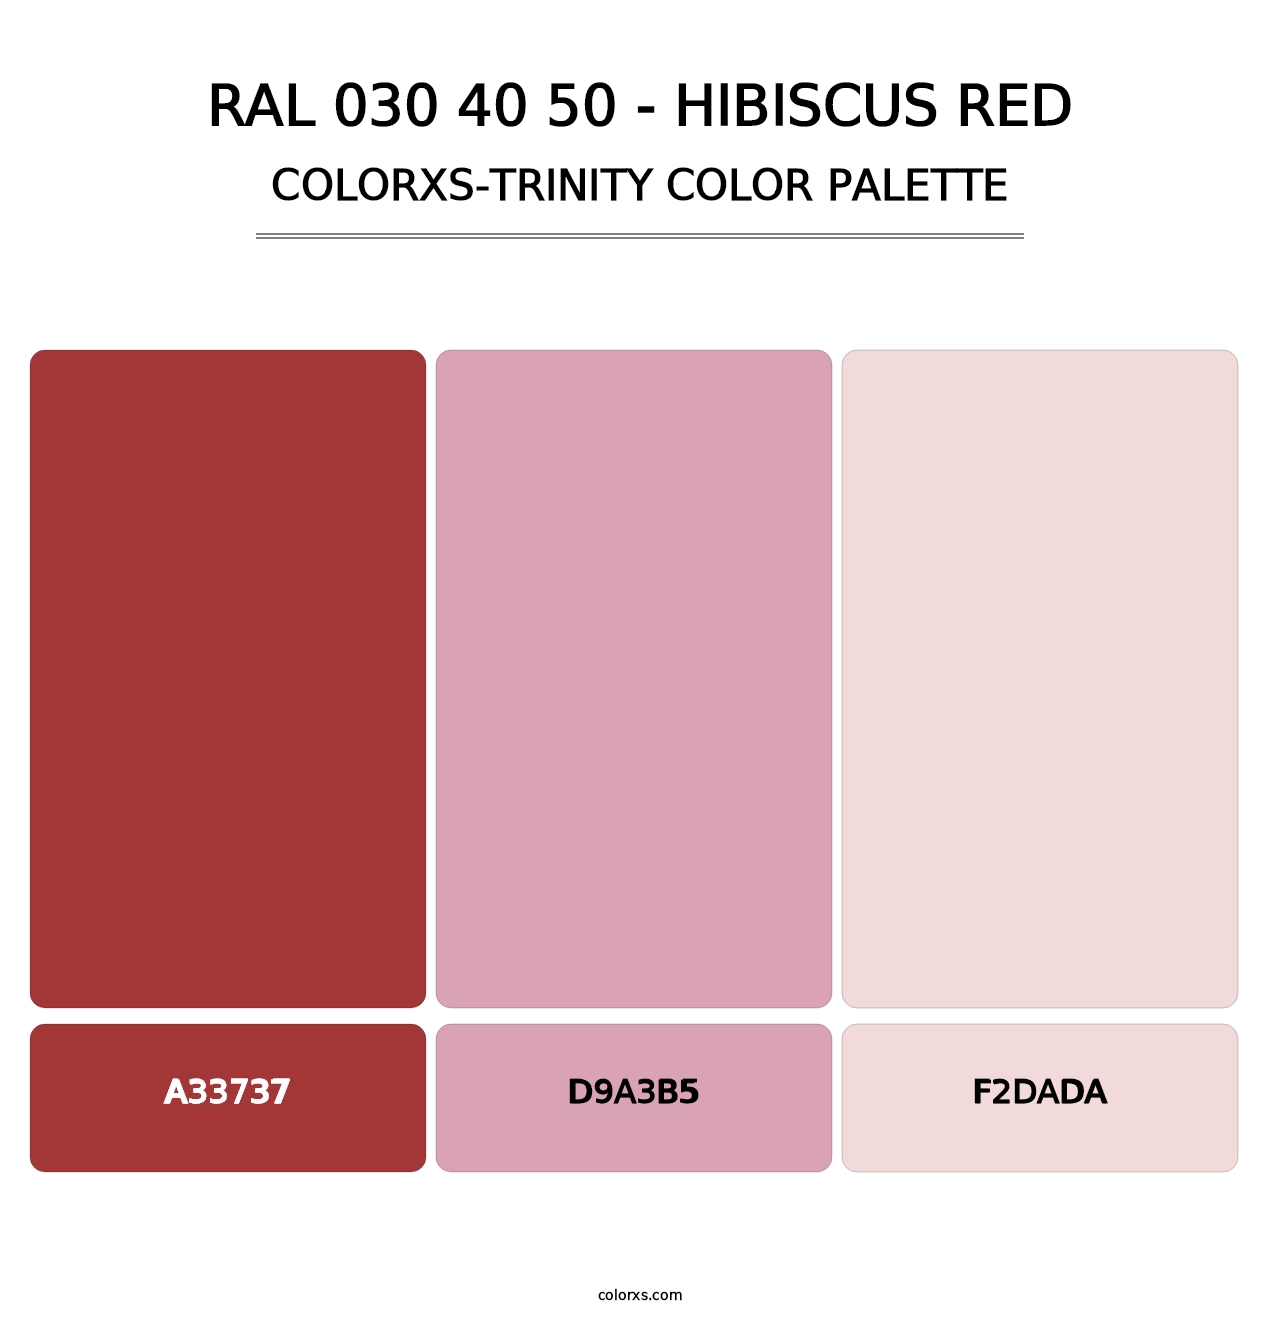 RAL 030 40 50 - Hibiscus Red - Colorxs Trinity Palette